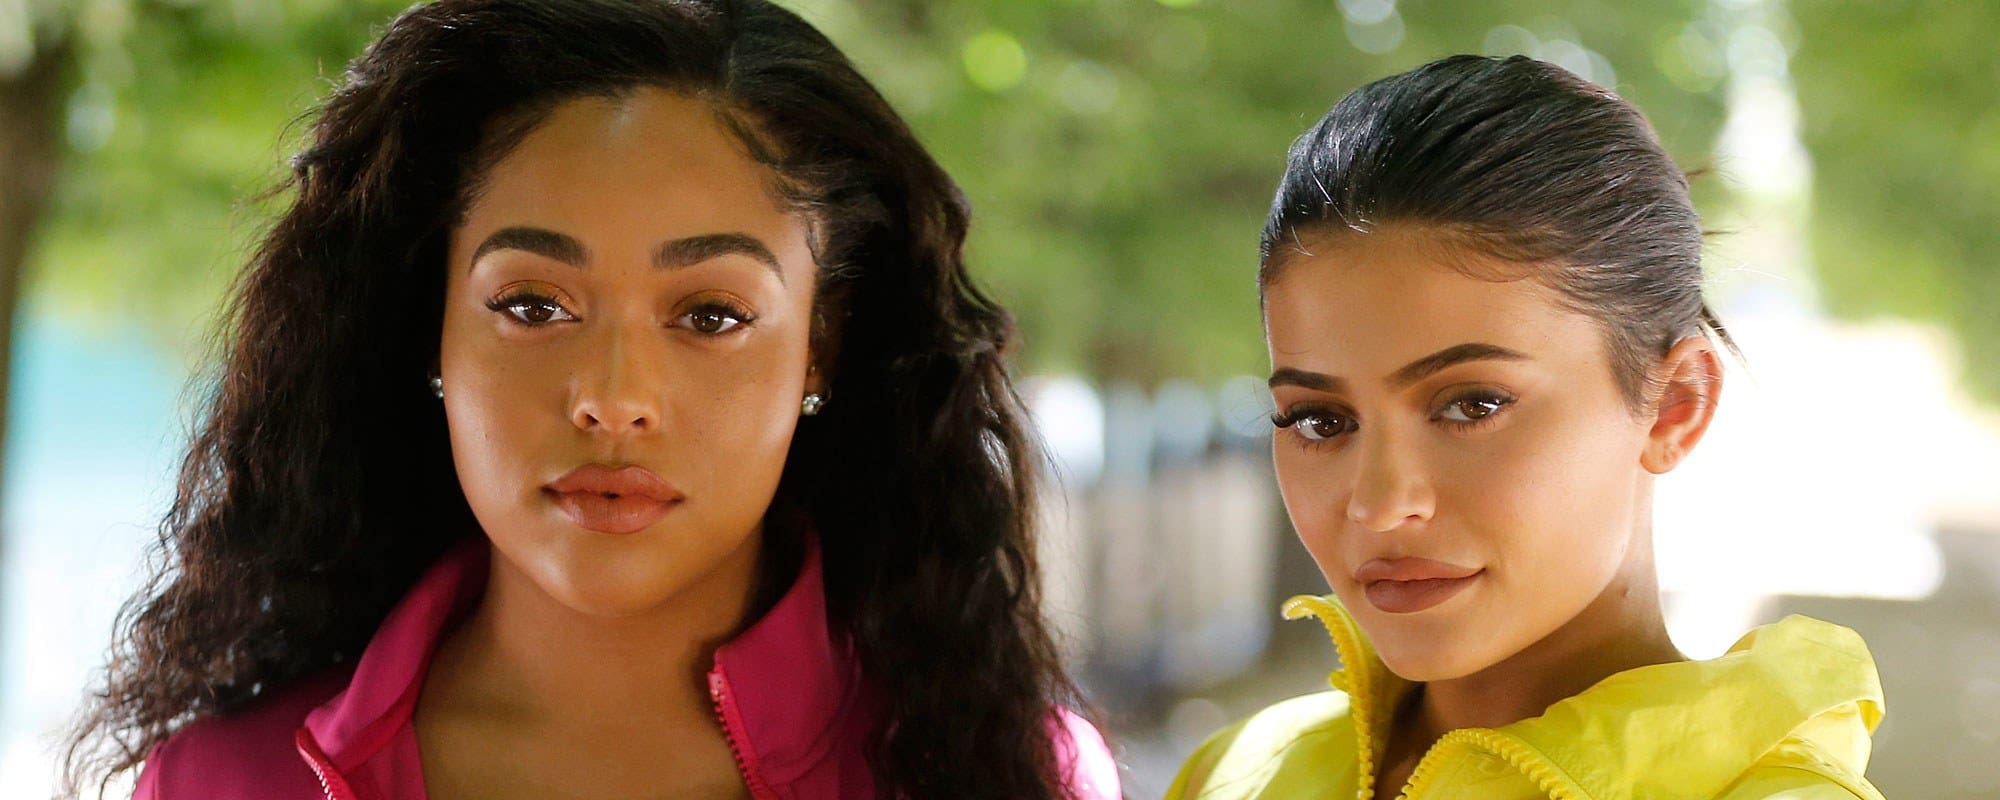 Kylie Jenner Reveals What She Said To Jordyn Woods Kylie